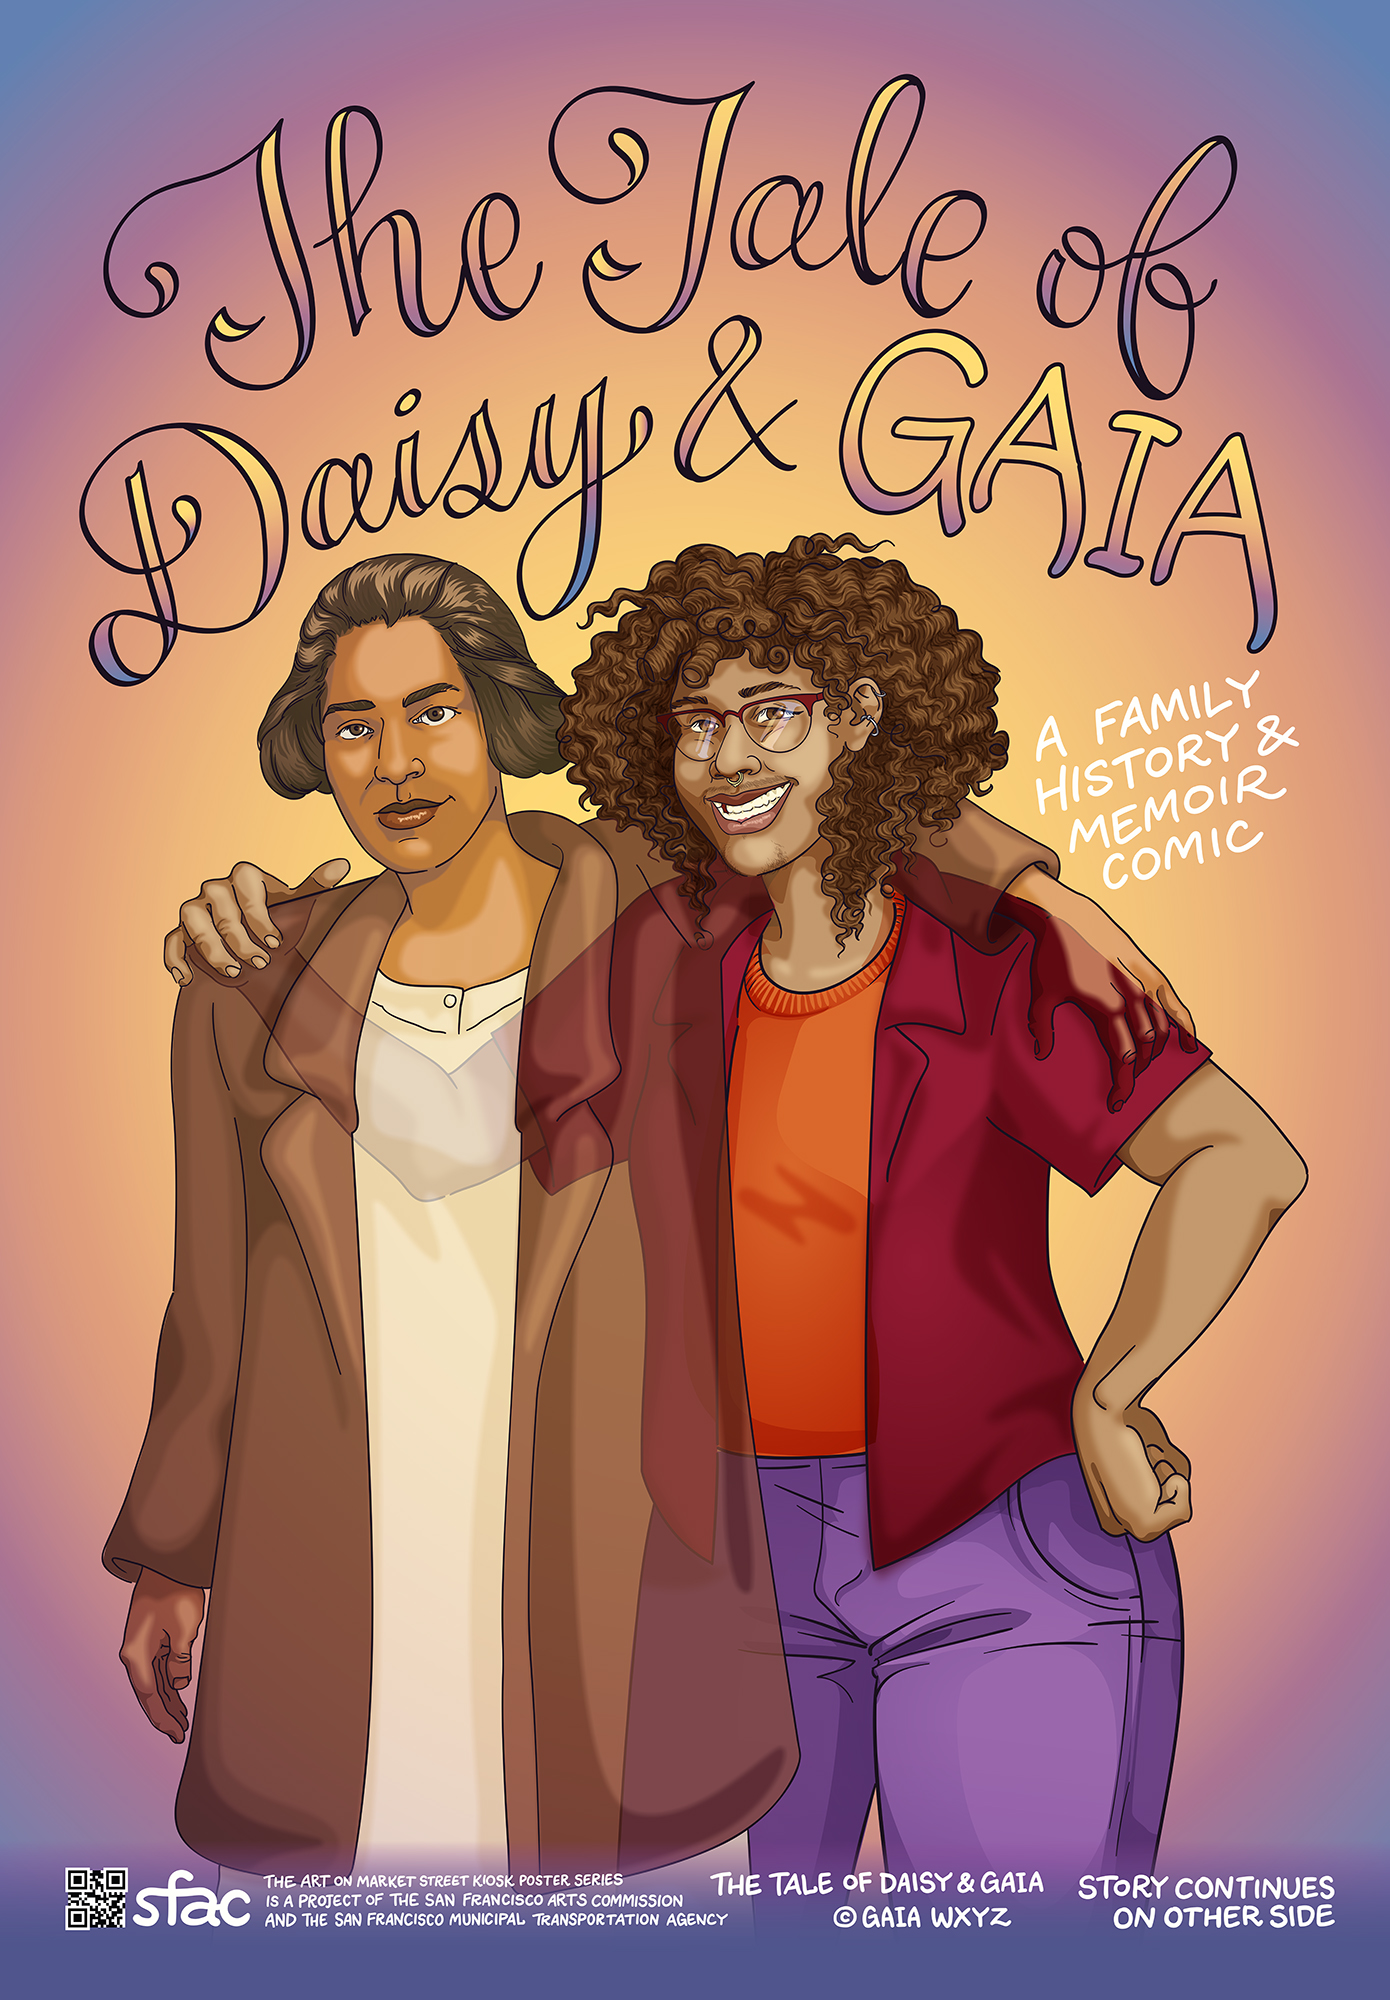 Colorful poster of artist with their great-grandmother with title text "The Tale of Daisy and Gaia"